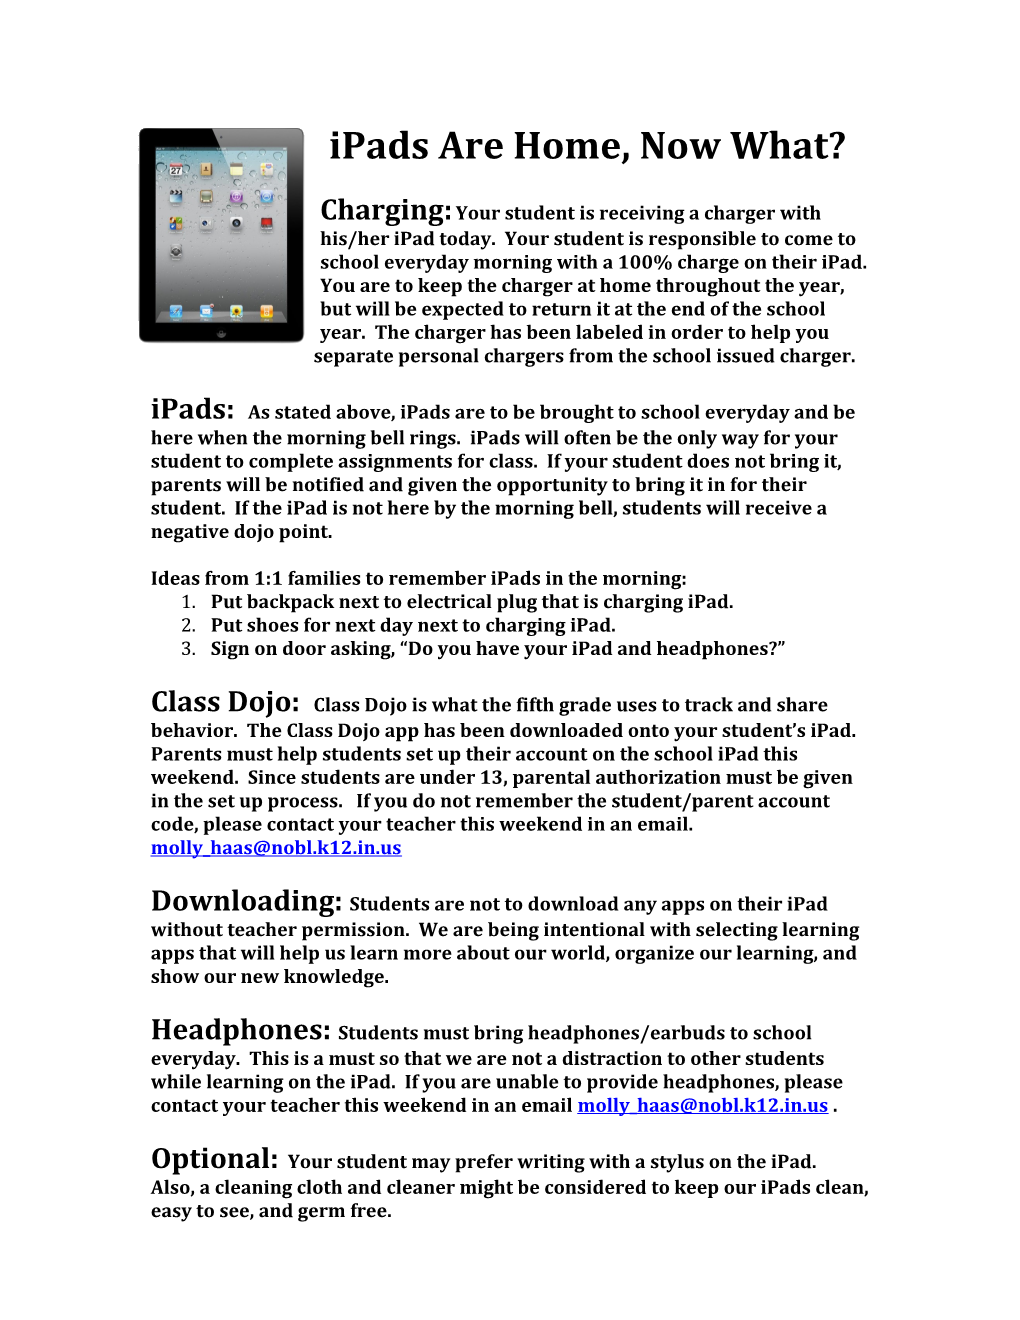 Ideas from 1:1 Families to Remember Ipads in the Morning